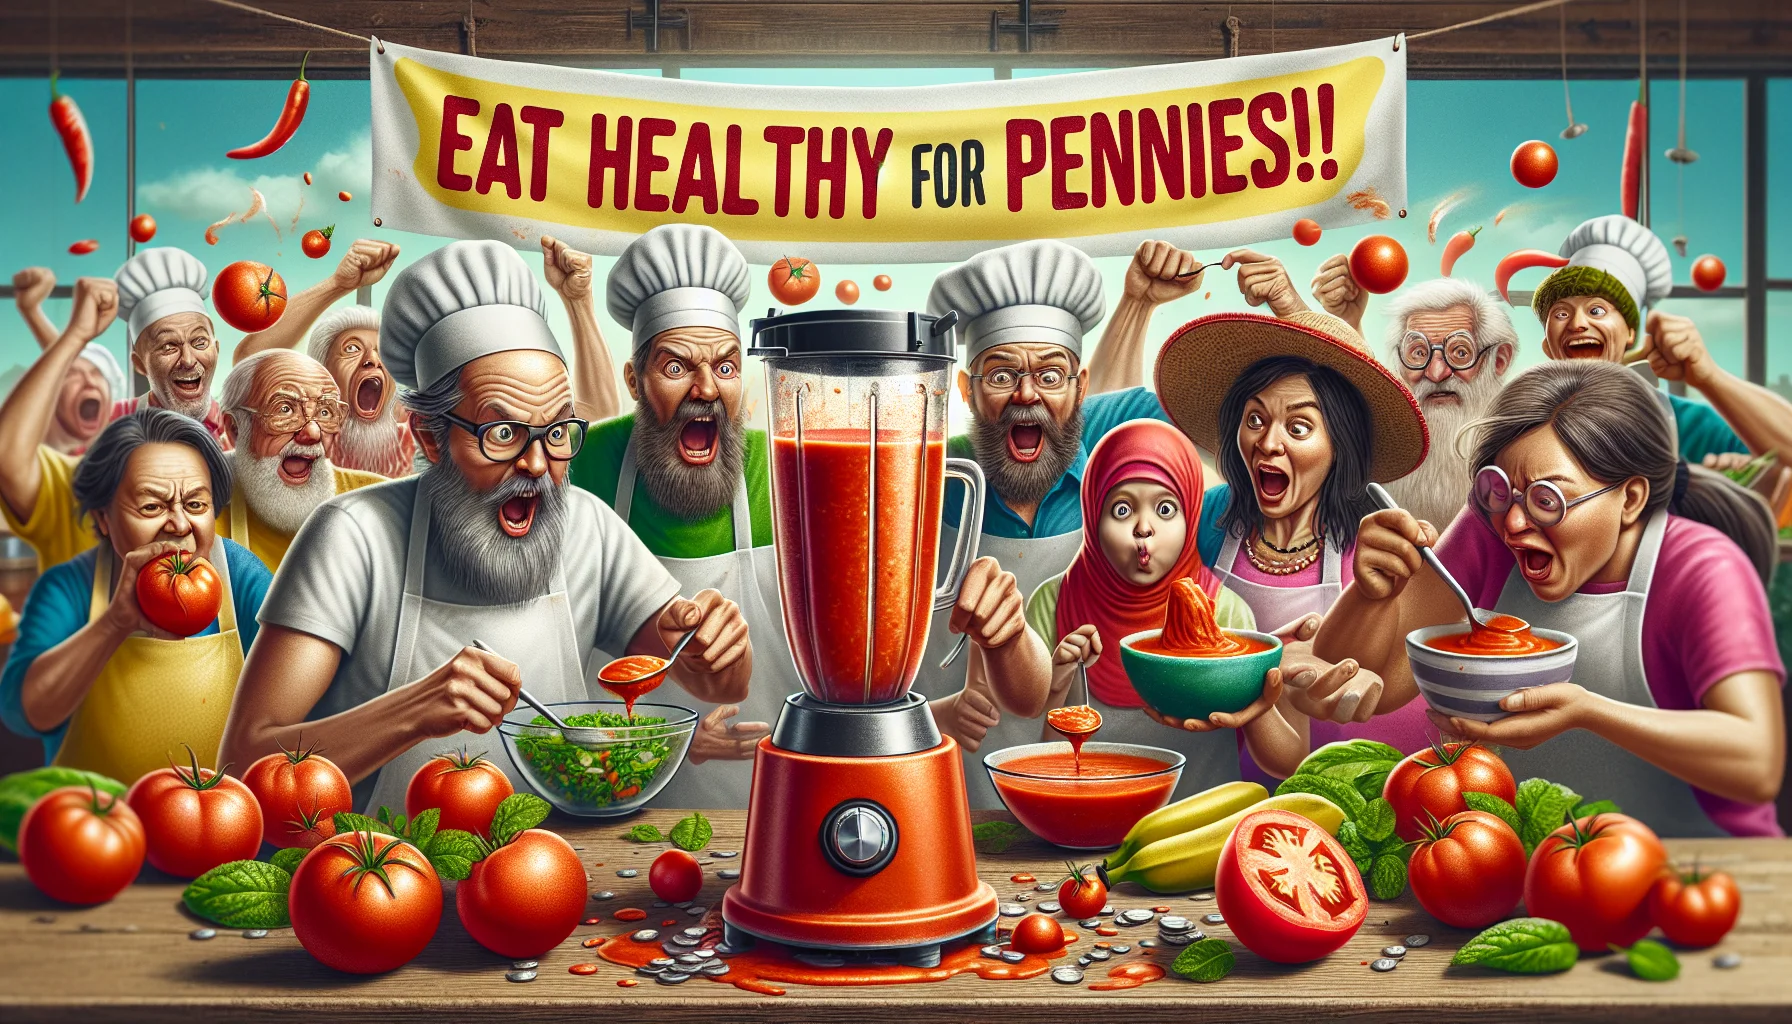 Craft a humorous and realistic depiction of an energetic scene involving a homemade tomato soup recipe. The soup is prepared using a standard blender, and the fresh, juicy tomatoes and other vibrant ingredients are in the foreground, highlighting their freshness. A large banner in the background humorously reads 'Eat Healthy for Pennies!', alluding to the cost-effectiveness of the meal. The scene is populated with a diverse group of people: a Caucasian male, a Hispanic female, a Middle-Eastern child, and a South Asian elderly man, all wearing comical hats and oversized bibs, eagerly waiting to taste the soup.